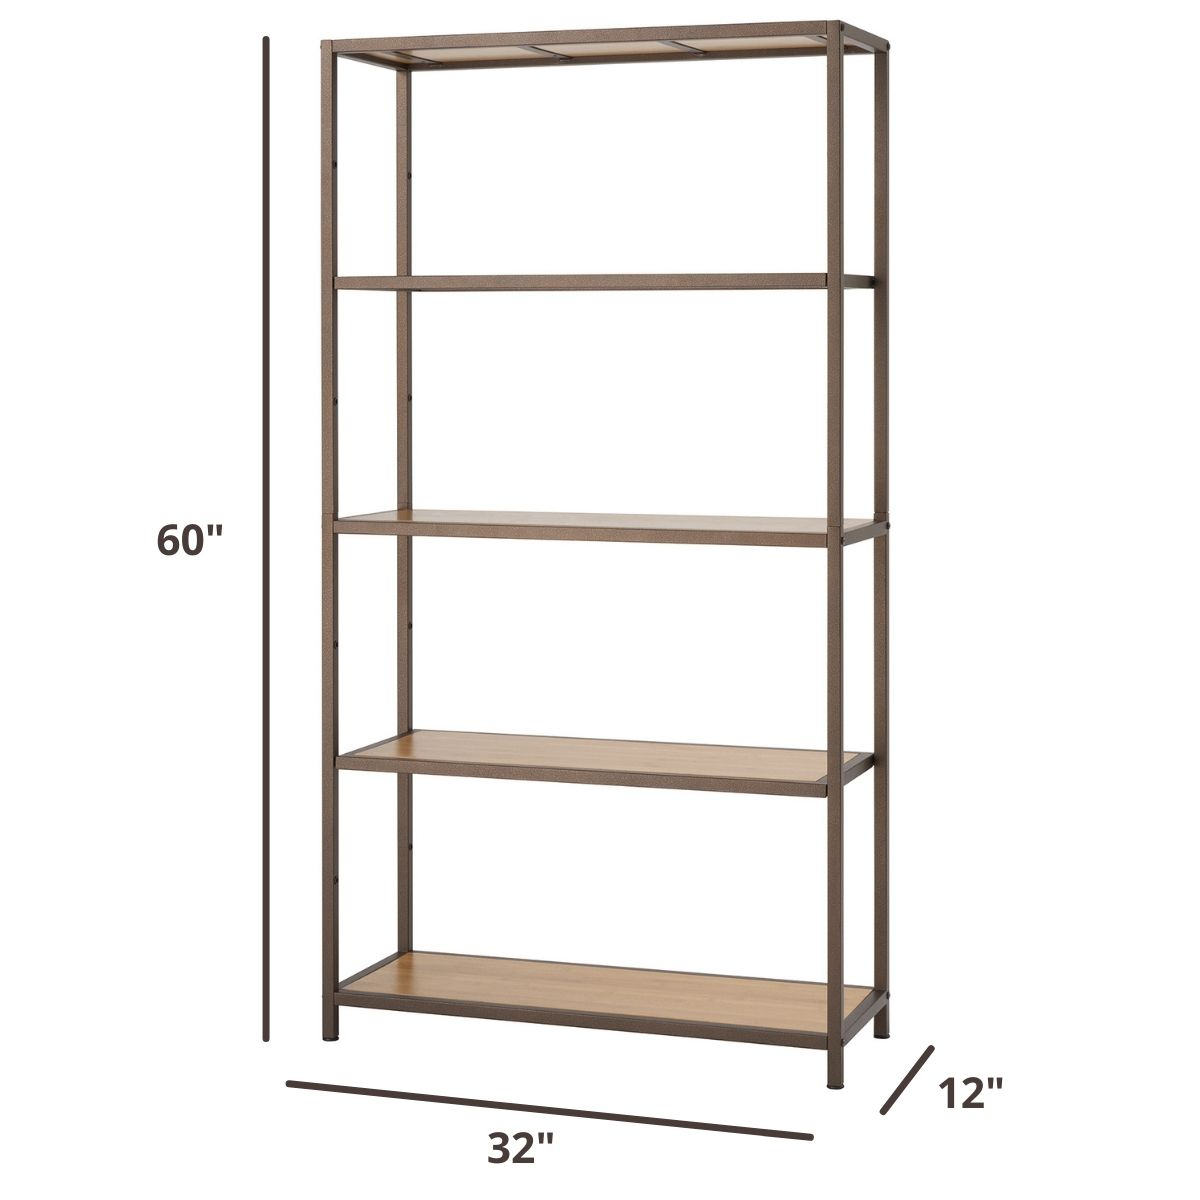 60 inches tall shelving rack